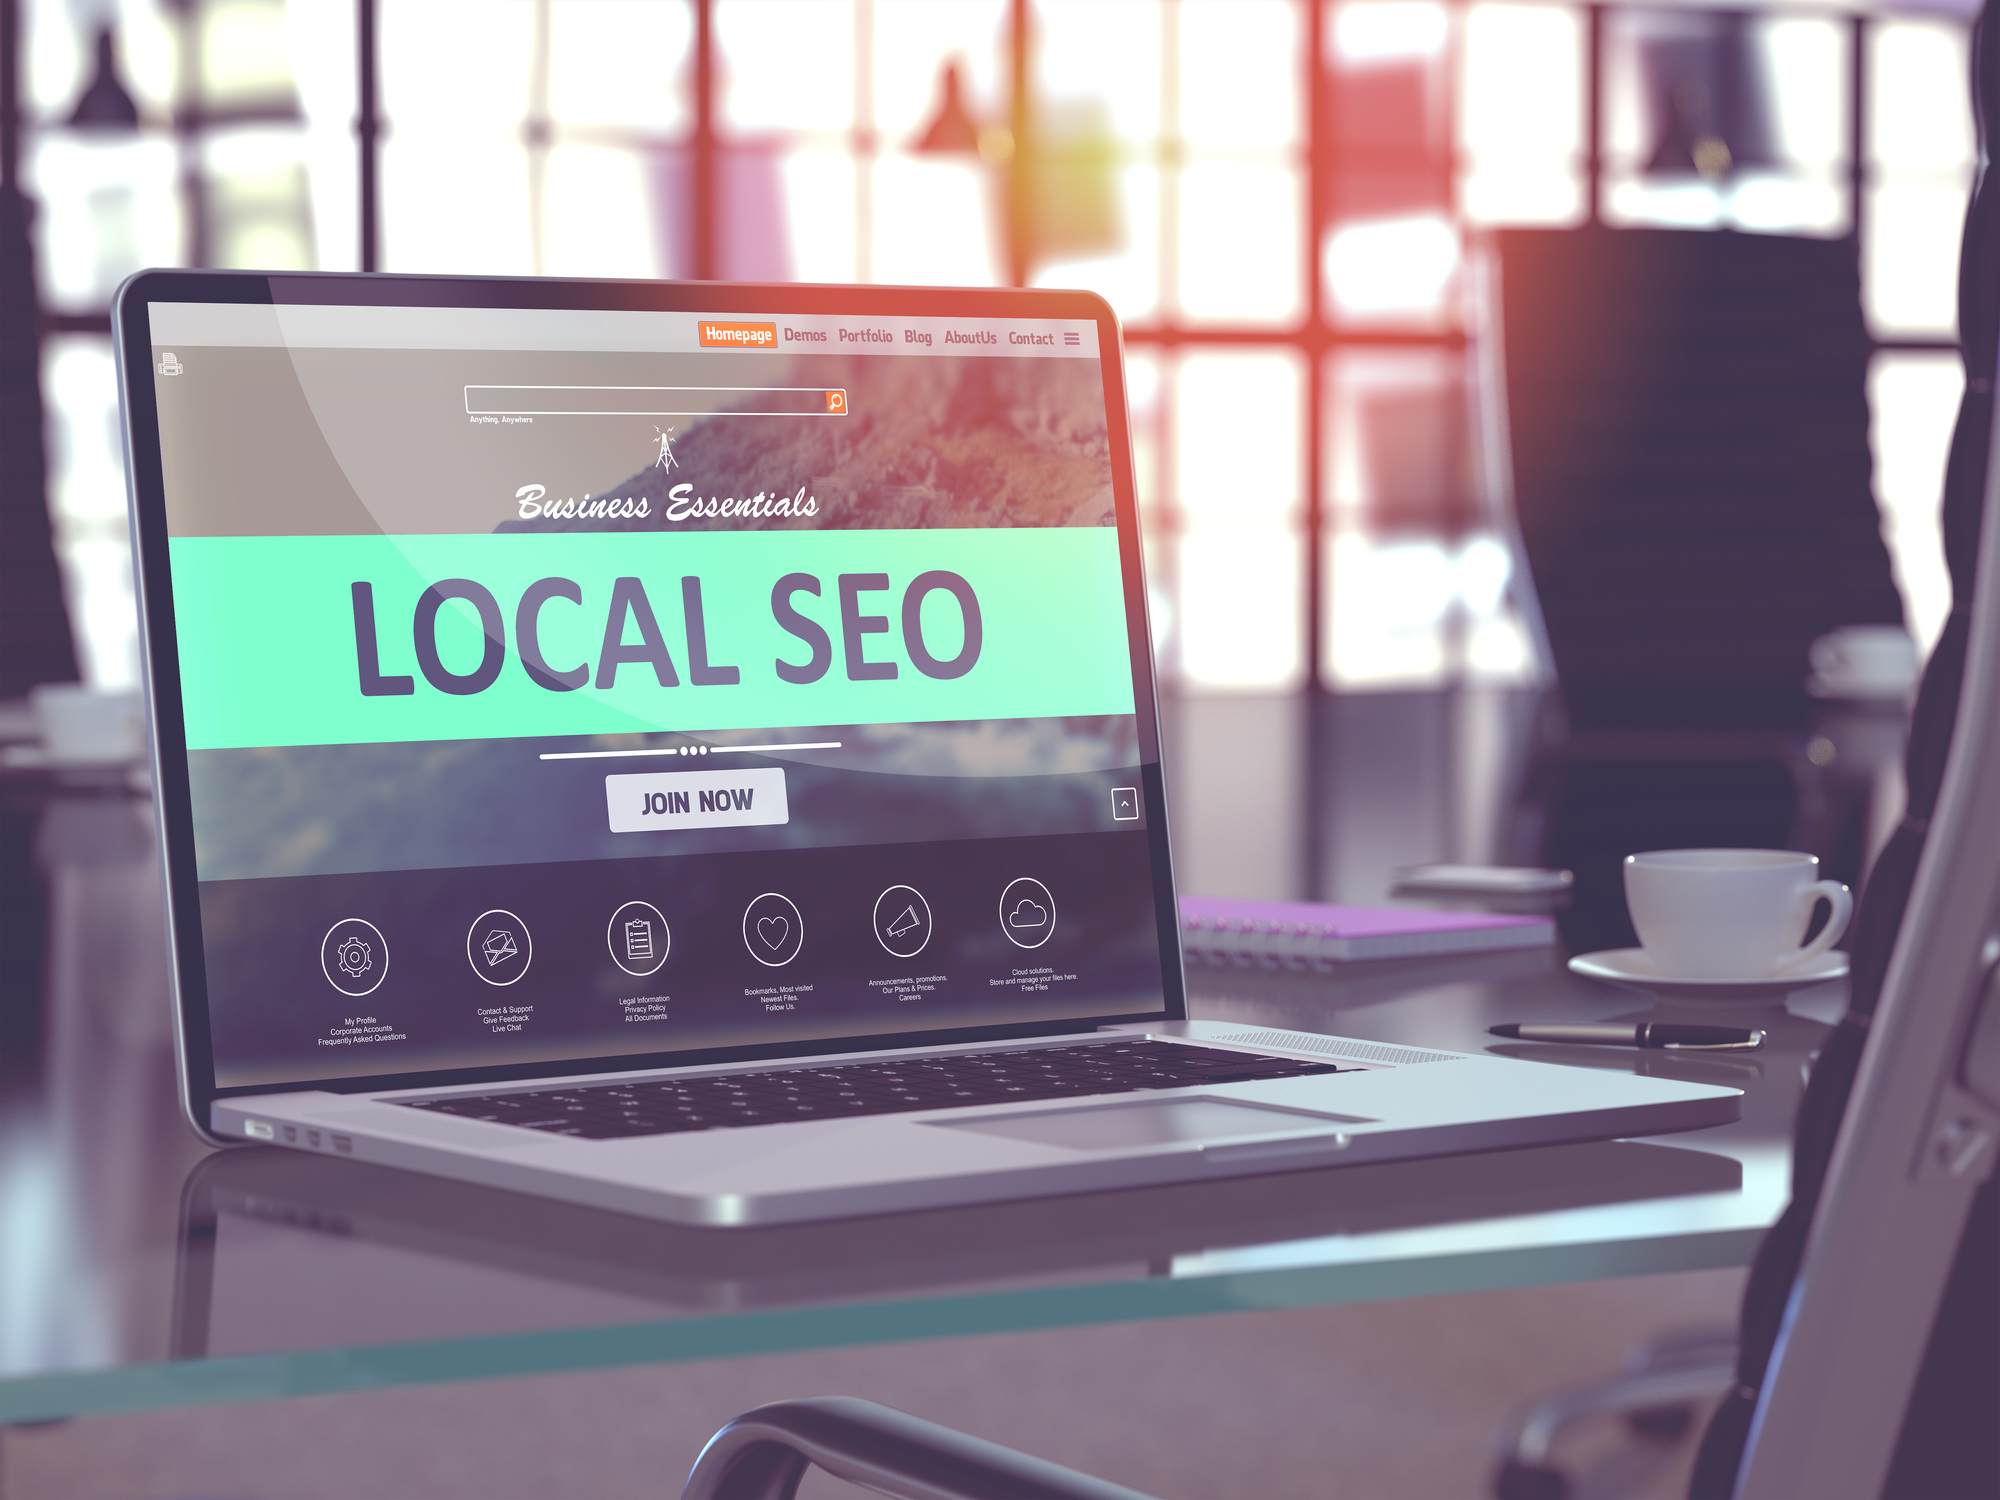 Top 10 Local SEO Tools For Small Businesses